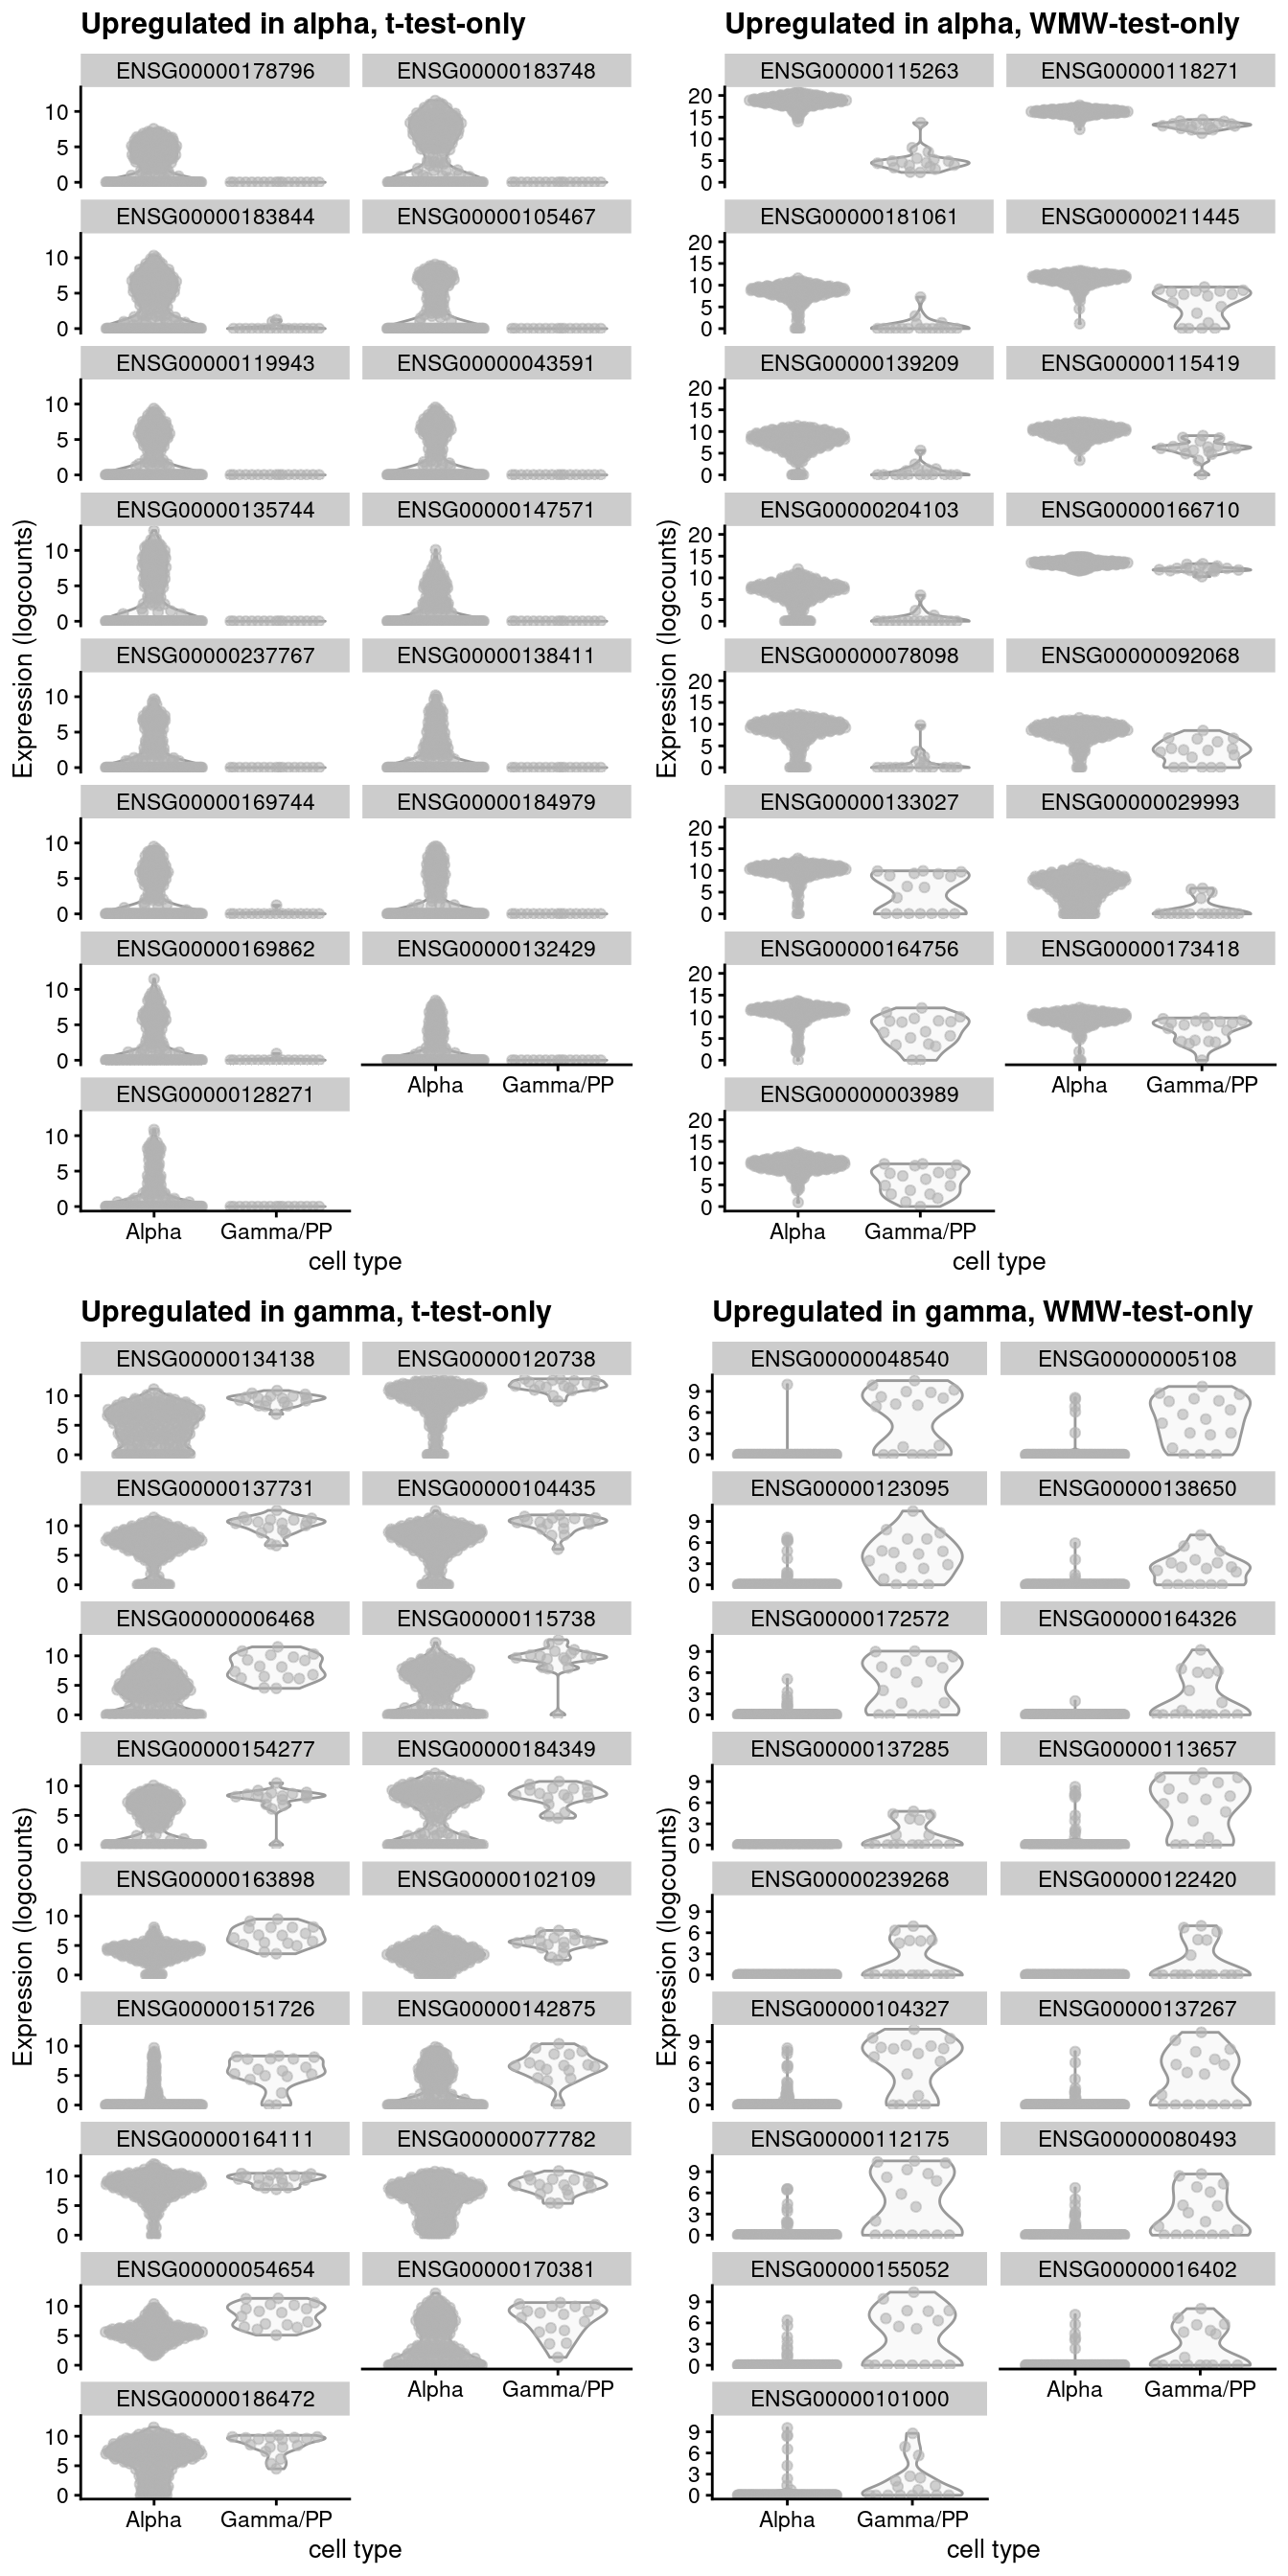 Distribution of expression values for alpha or gamma cell-specific markers in the GSE86469 human pancreas dataset. Each panel focuses on the genes that were uniquely ranked in the top 20 candidate markers by either the t-test or WMW test.